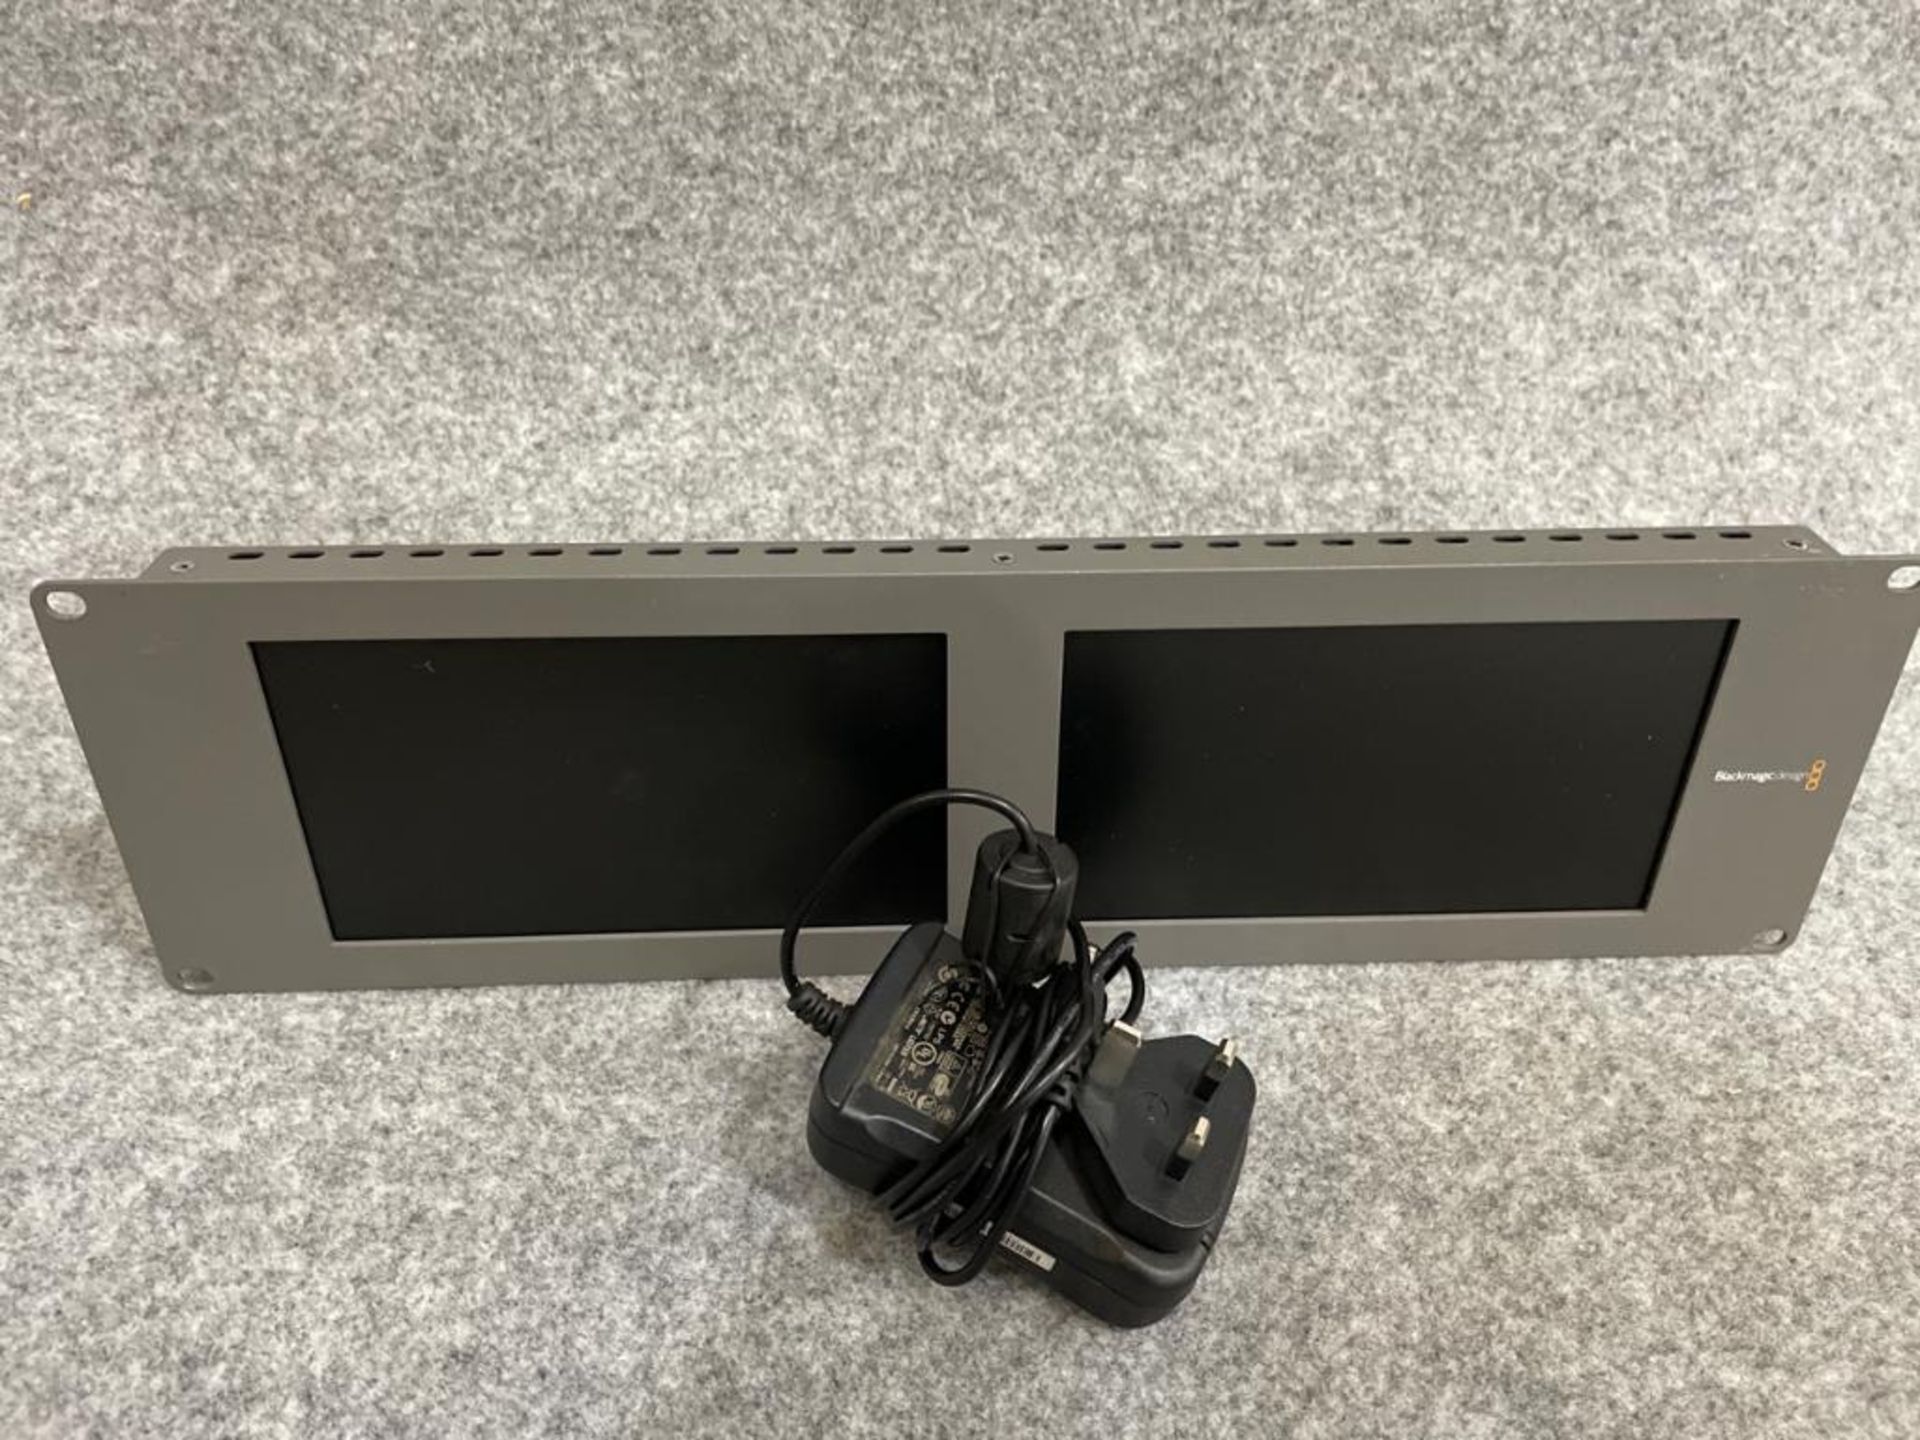 BlackMagic Dual HD Monitor with power supply SN:1391792 - Image 3 of 3